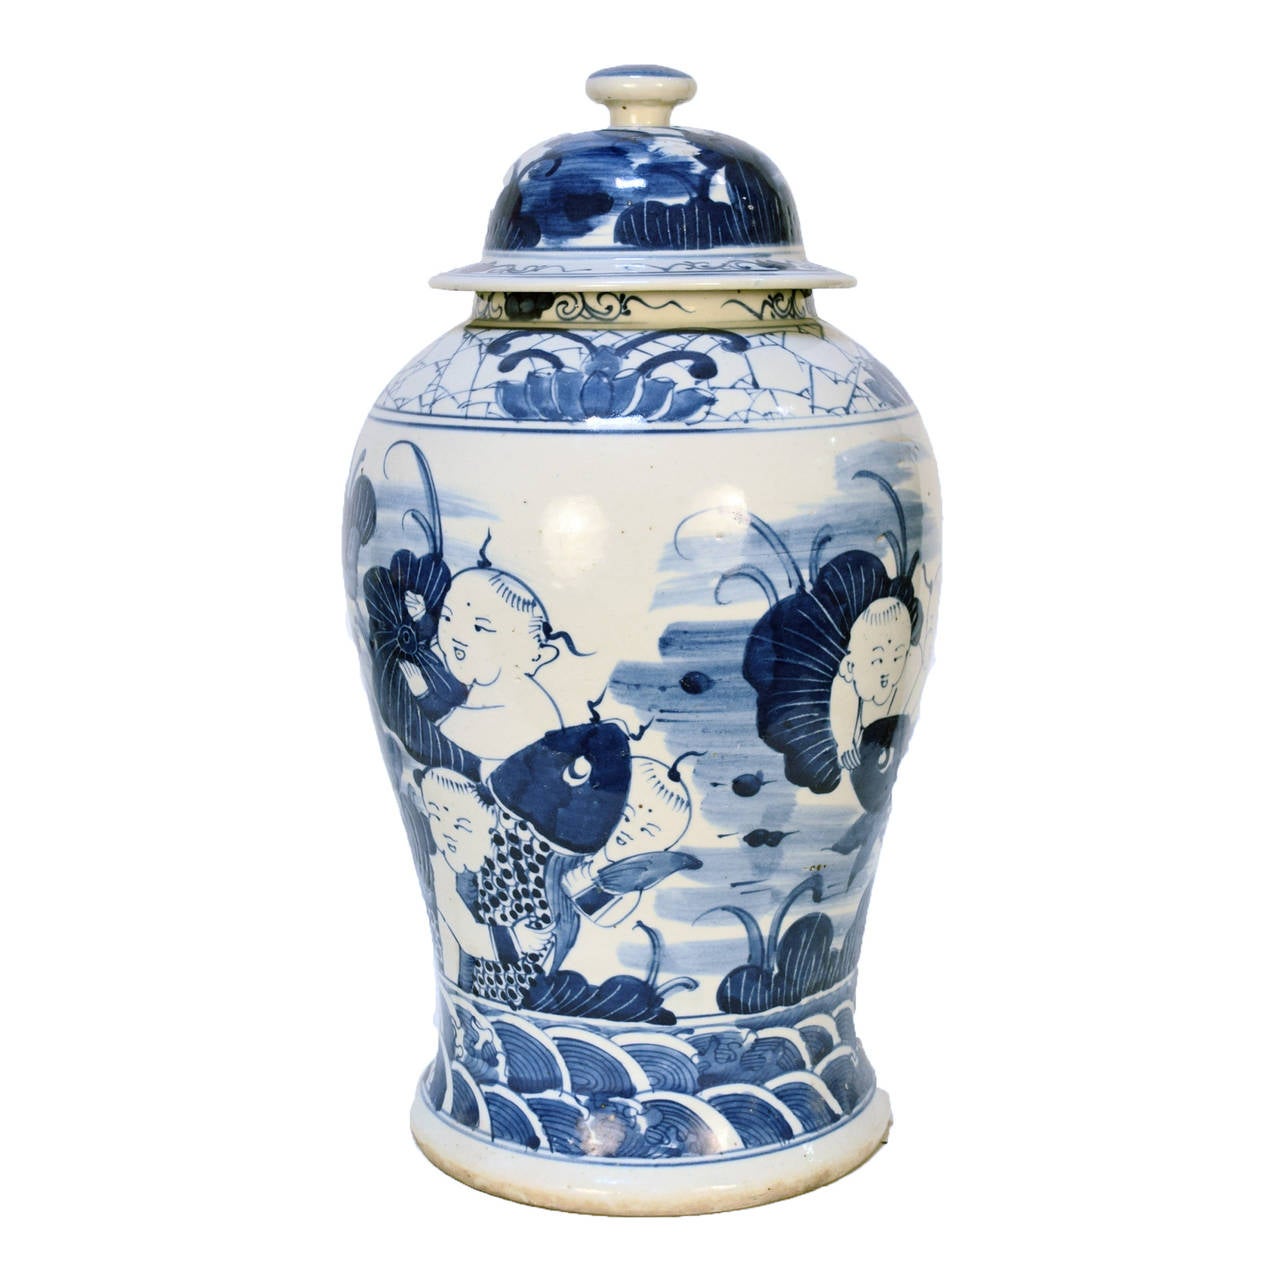 A blue and white ginger jars from Jiangxi Province, China painted with lucky babies and fish with a wave pattern along the base.